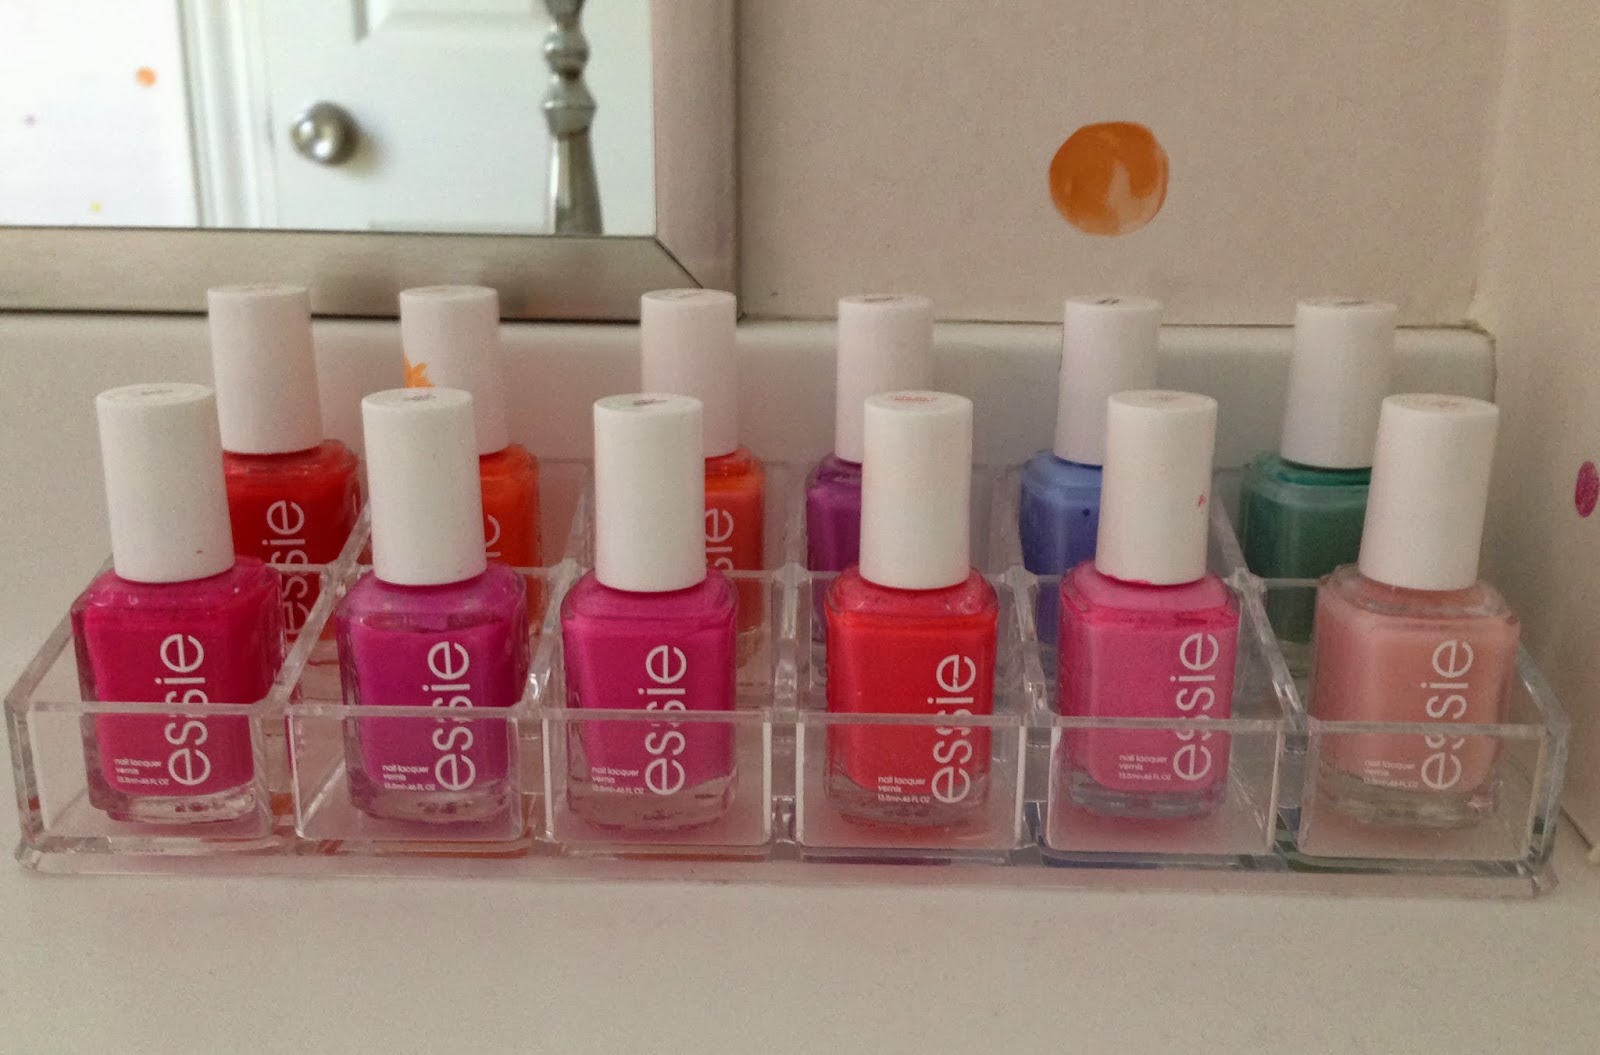 citrus and style: How to Organize Nail Polish